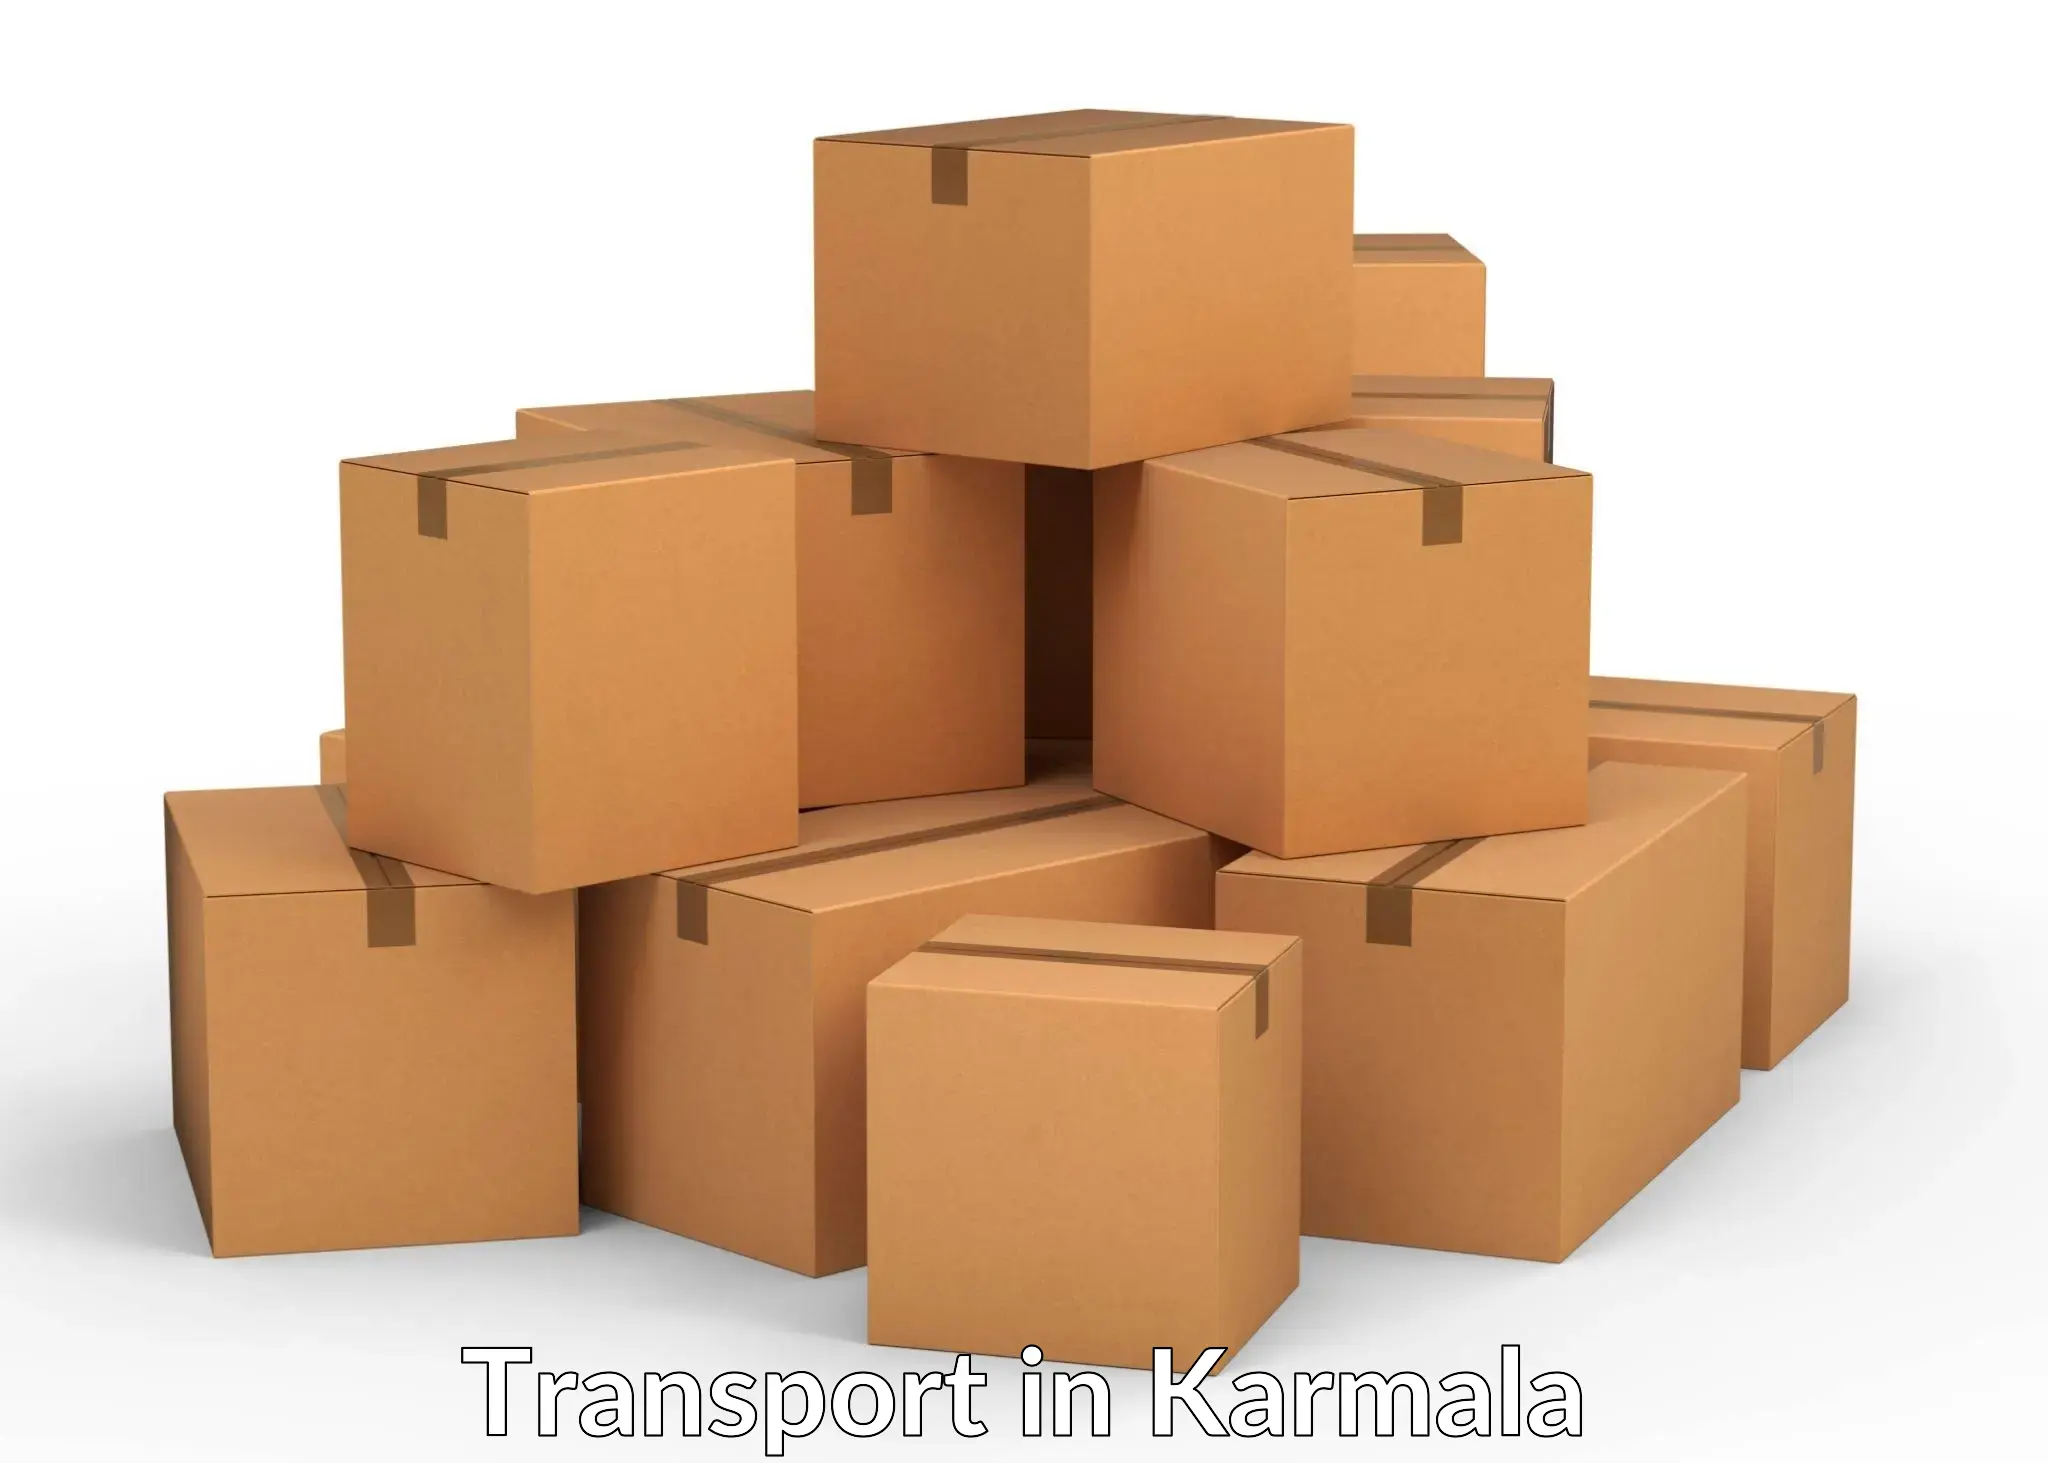 Container transportation services in Karmala